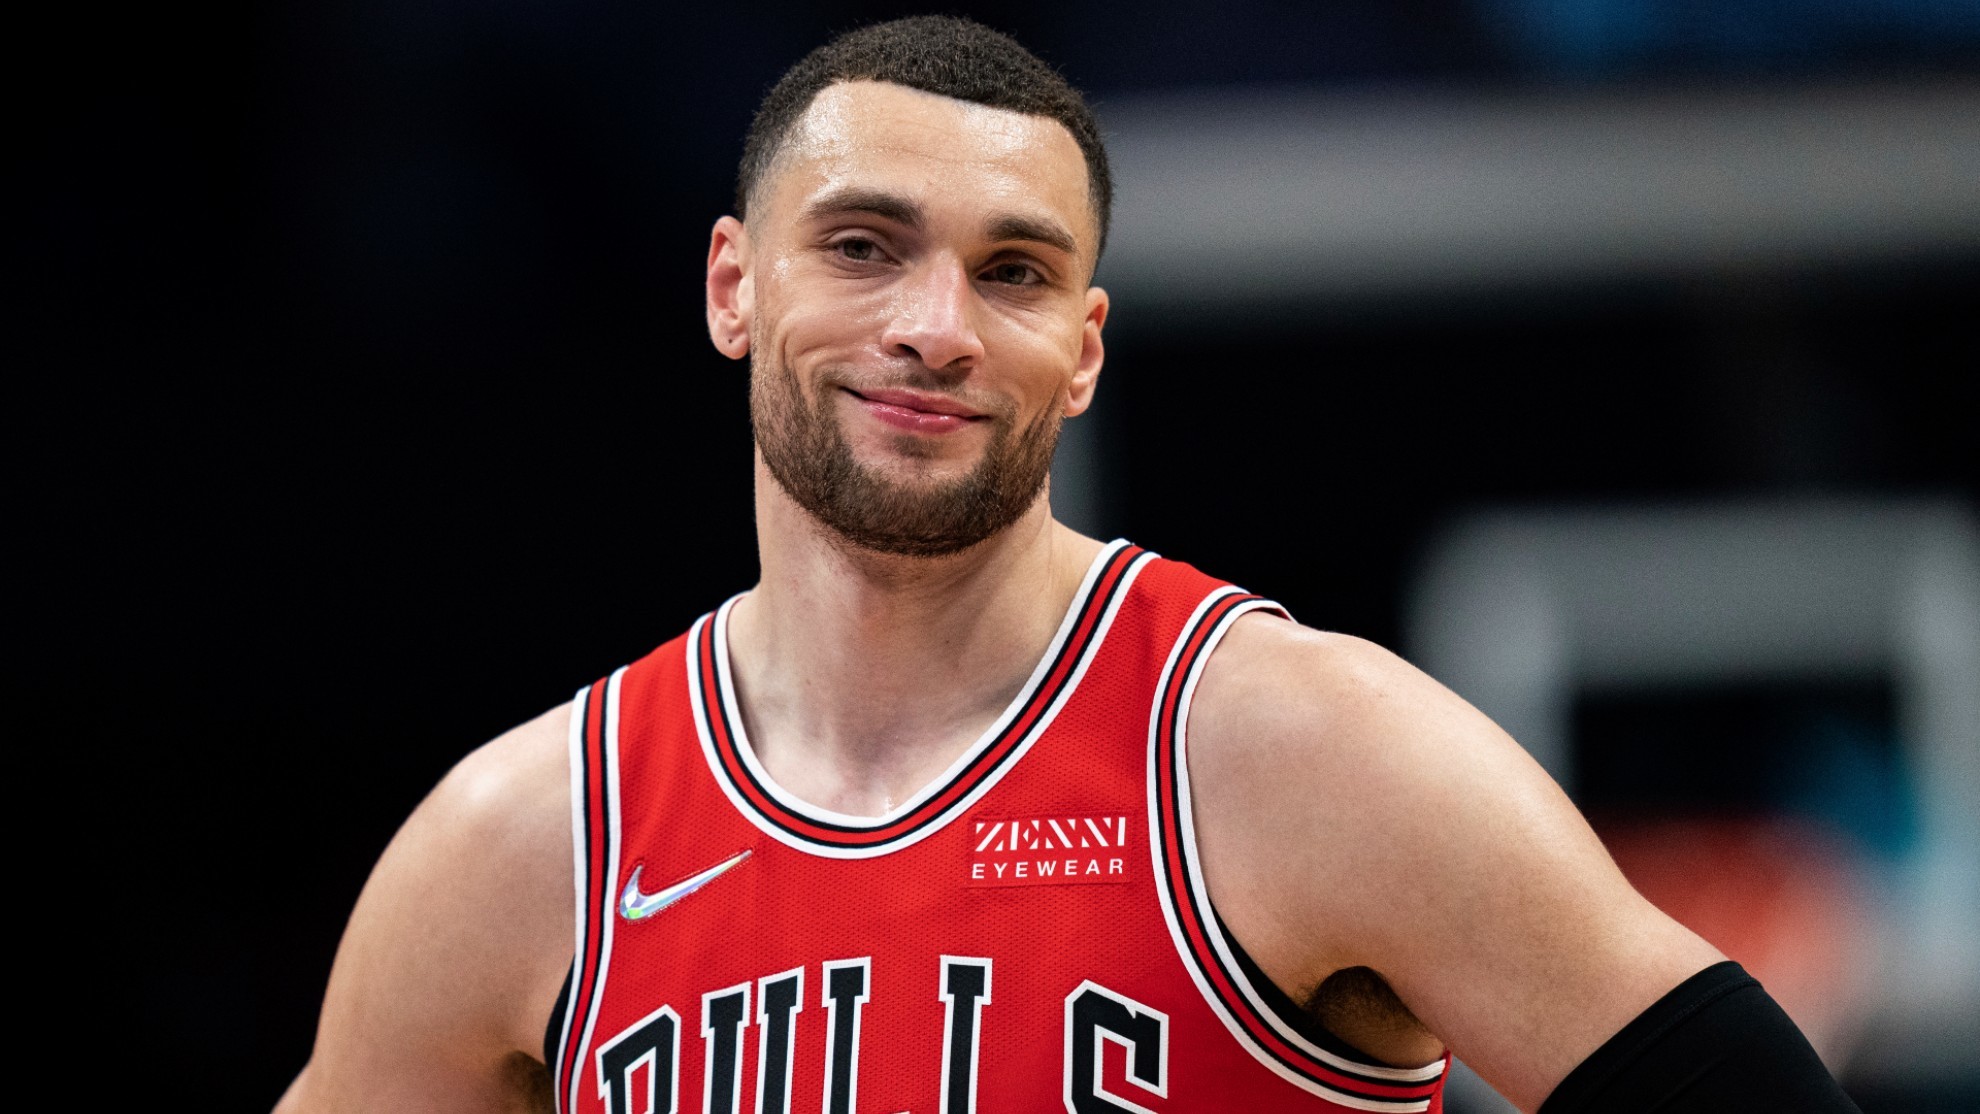 Chicago Bulls guard Zach LaVine pauses during the second half of the team's NBA basketball game against the Charlotte Hornets.